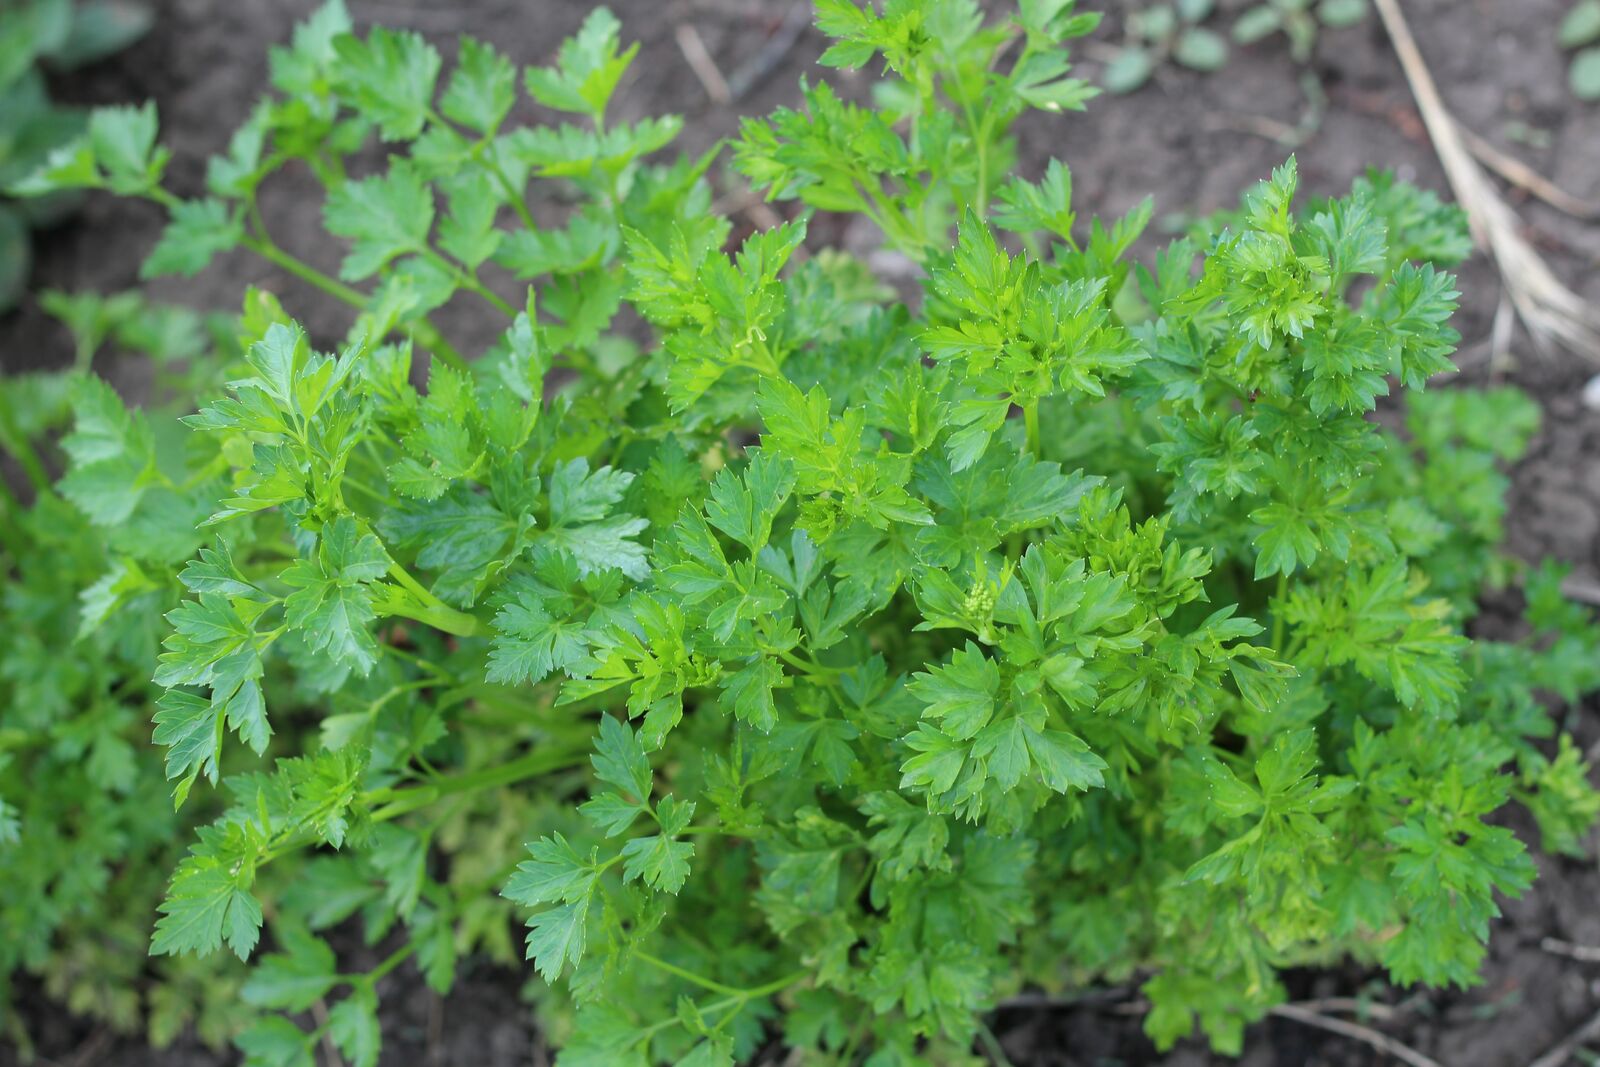 Parsley in the vegetable patch